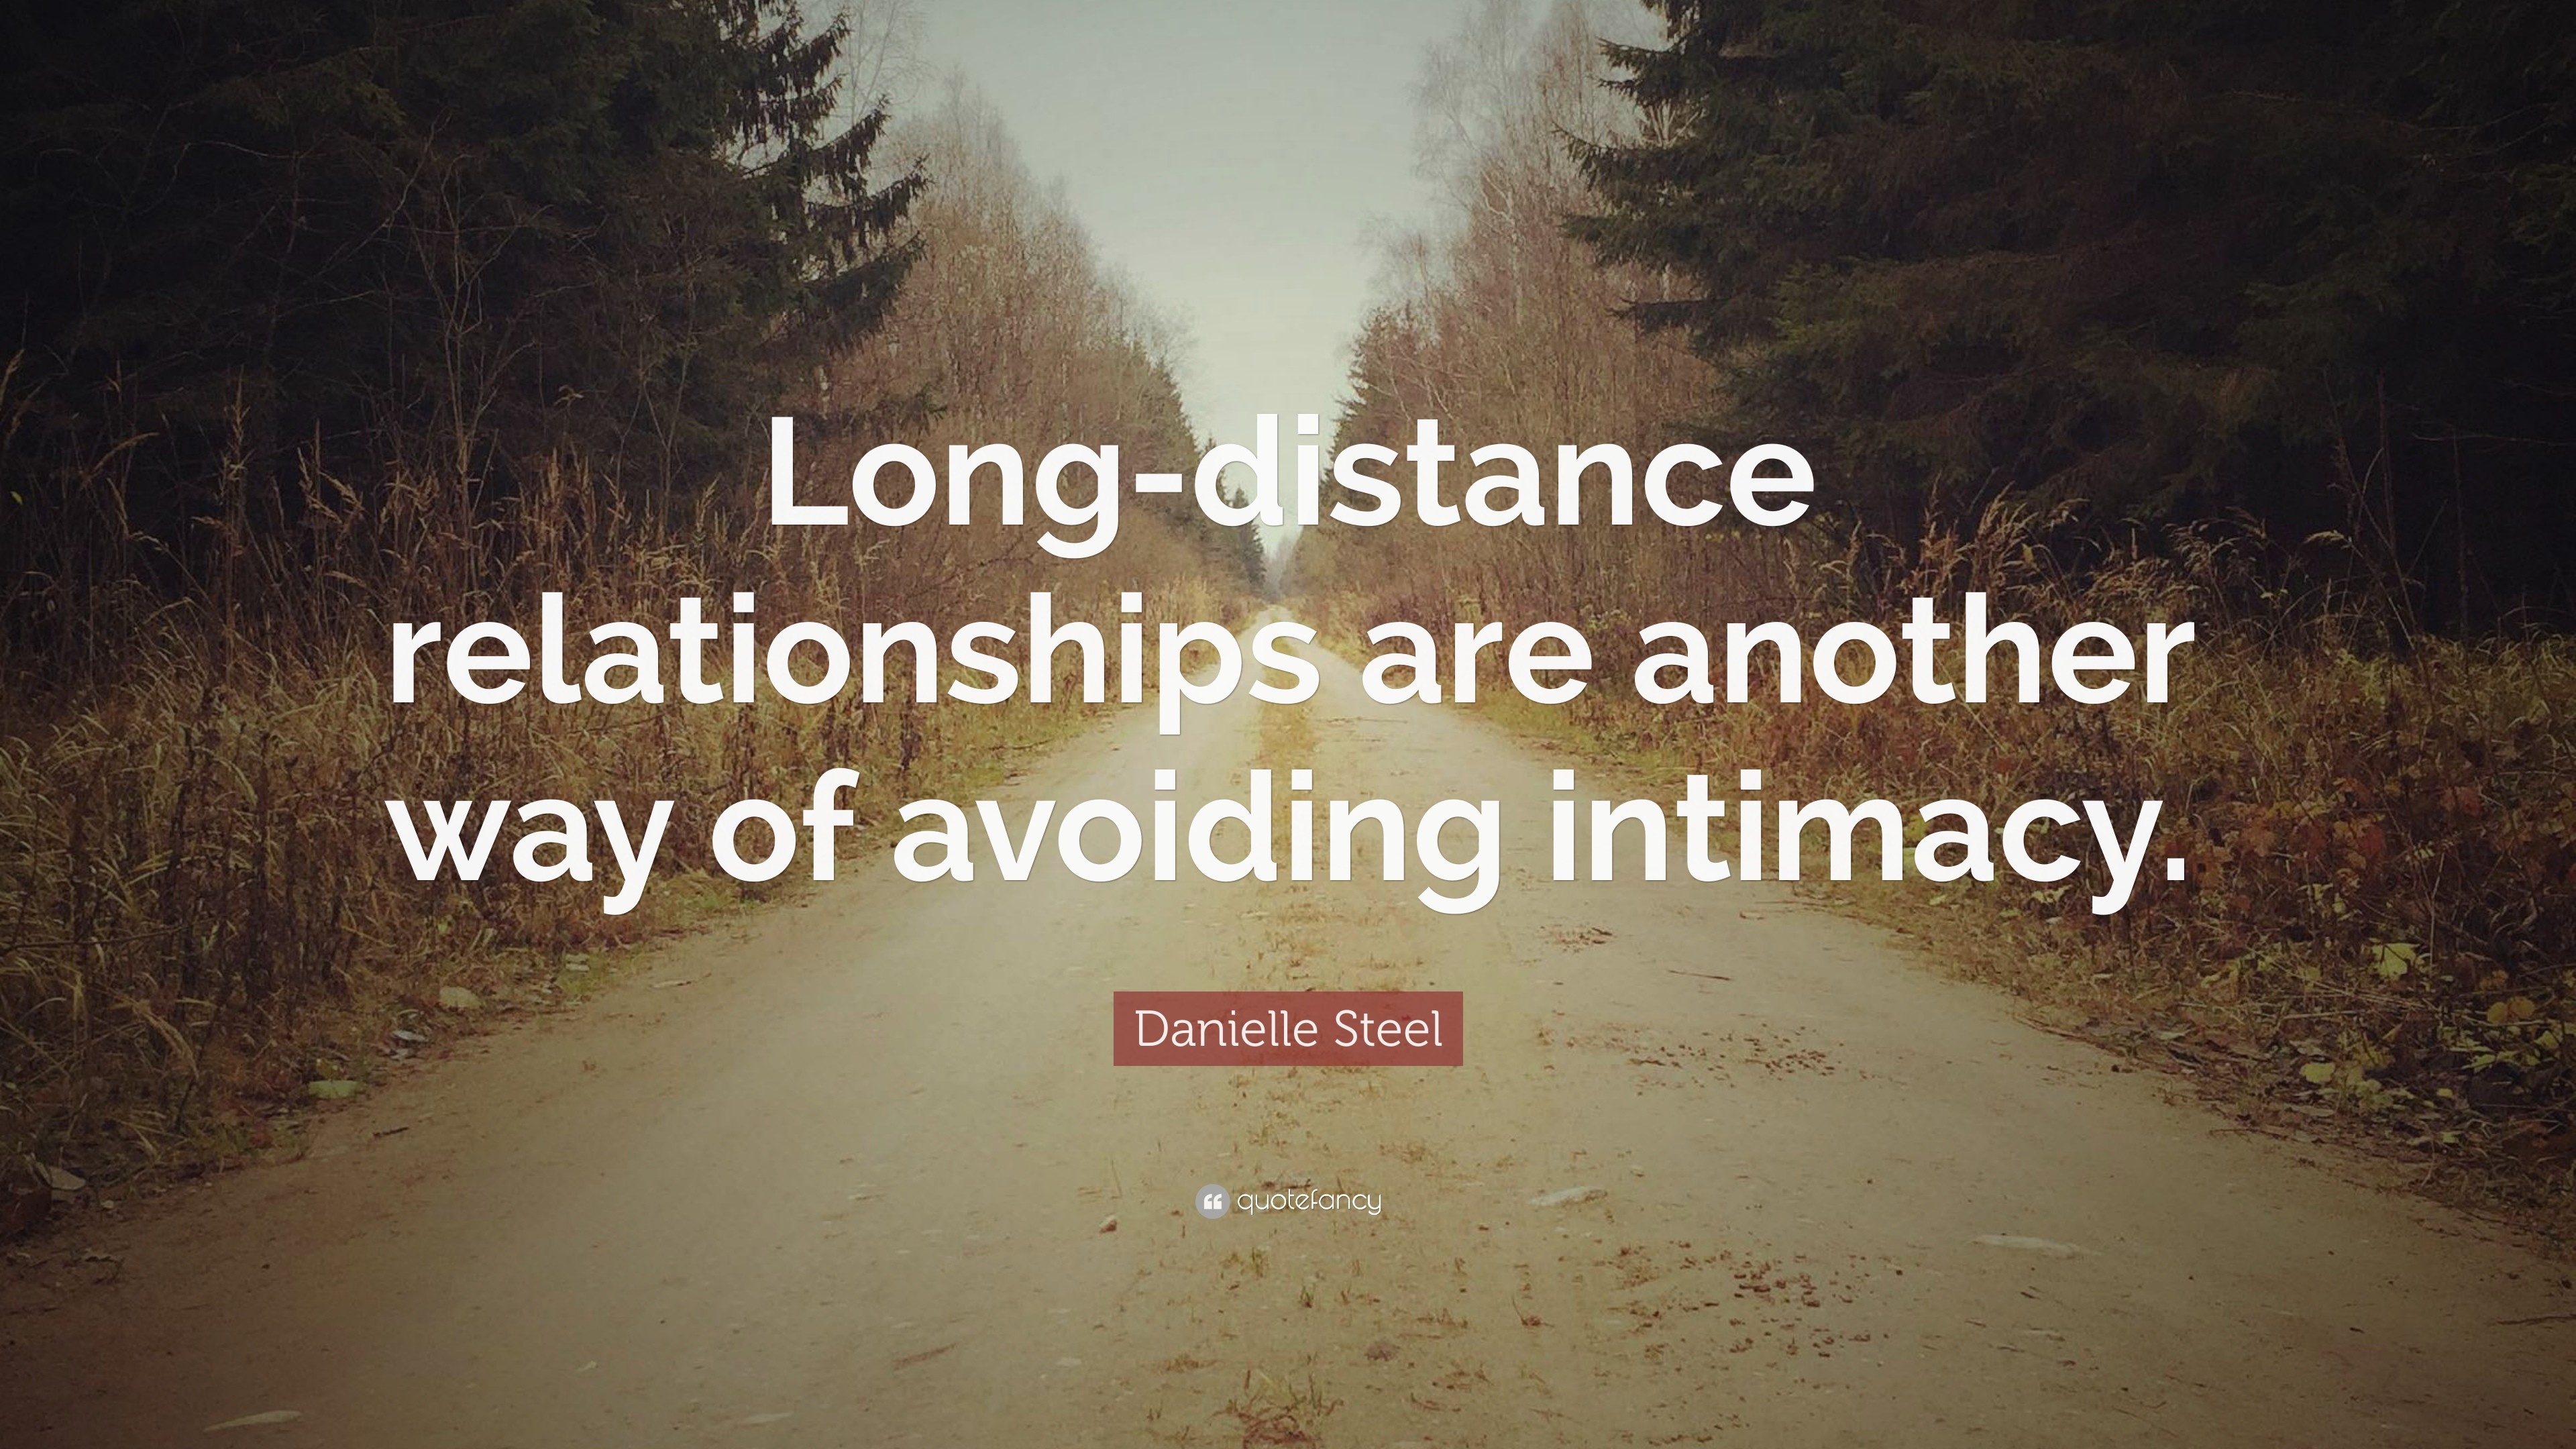 3840x2160 6 wallpapers. Danielle Steel Quote: “Long-distance relationships ...